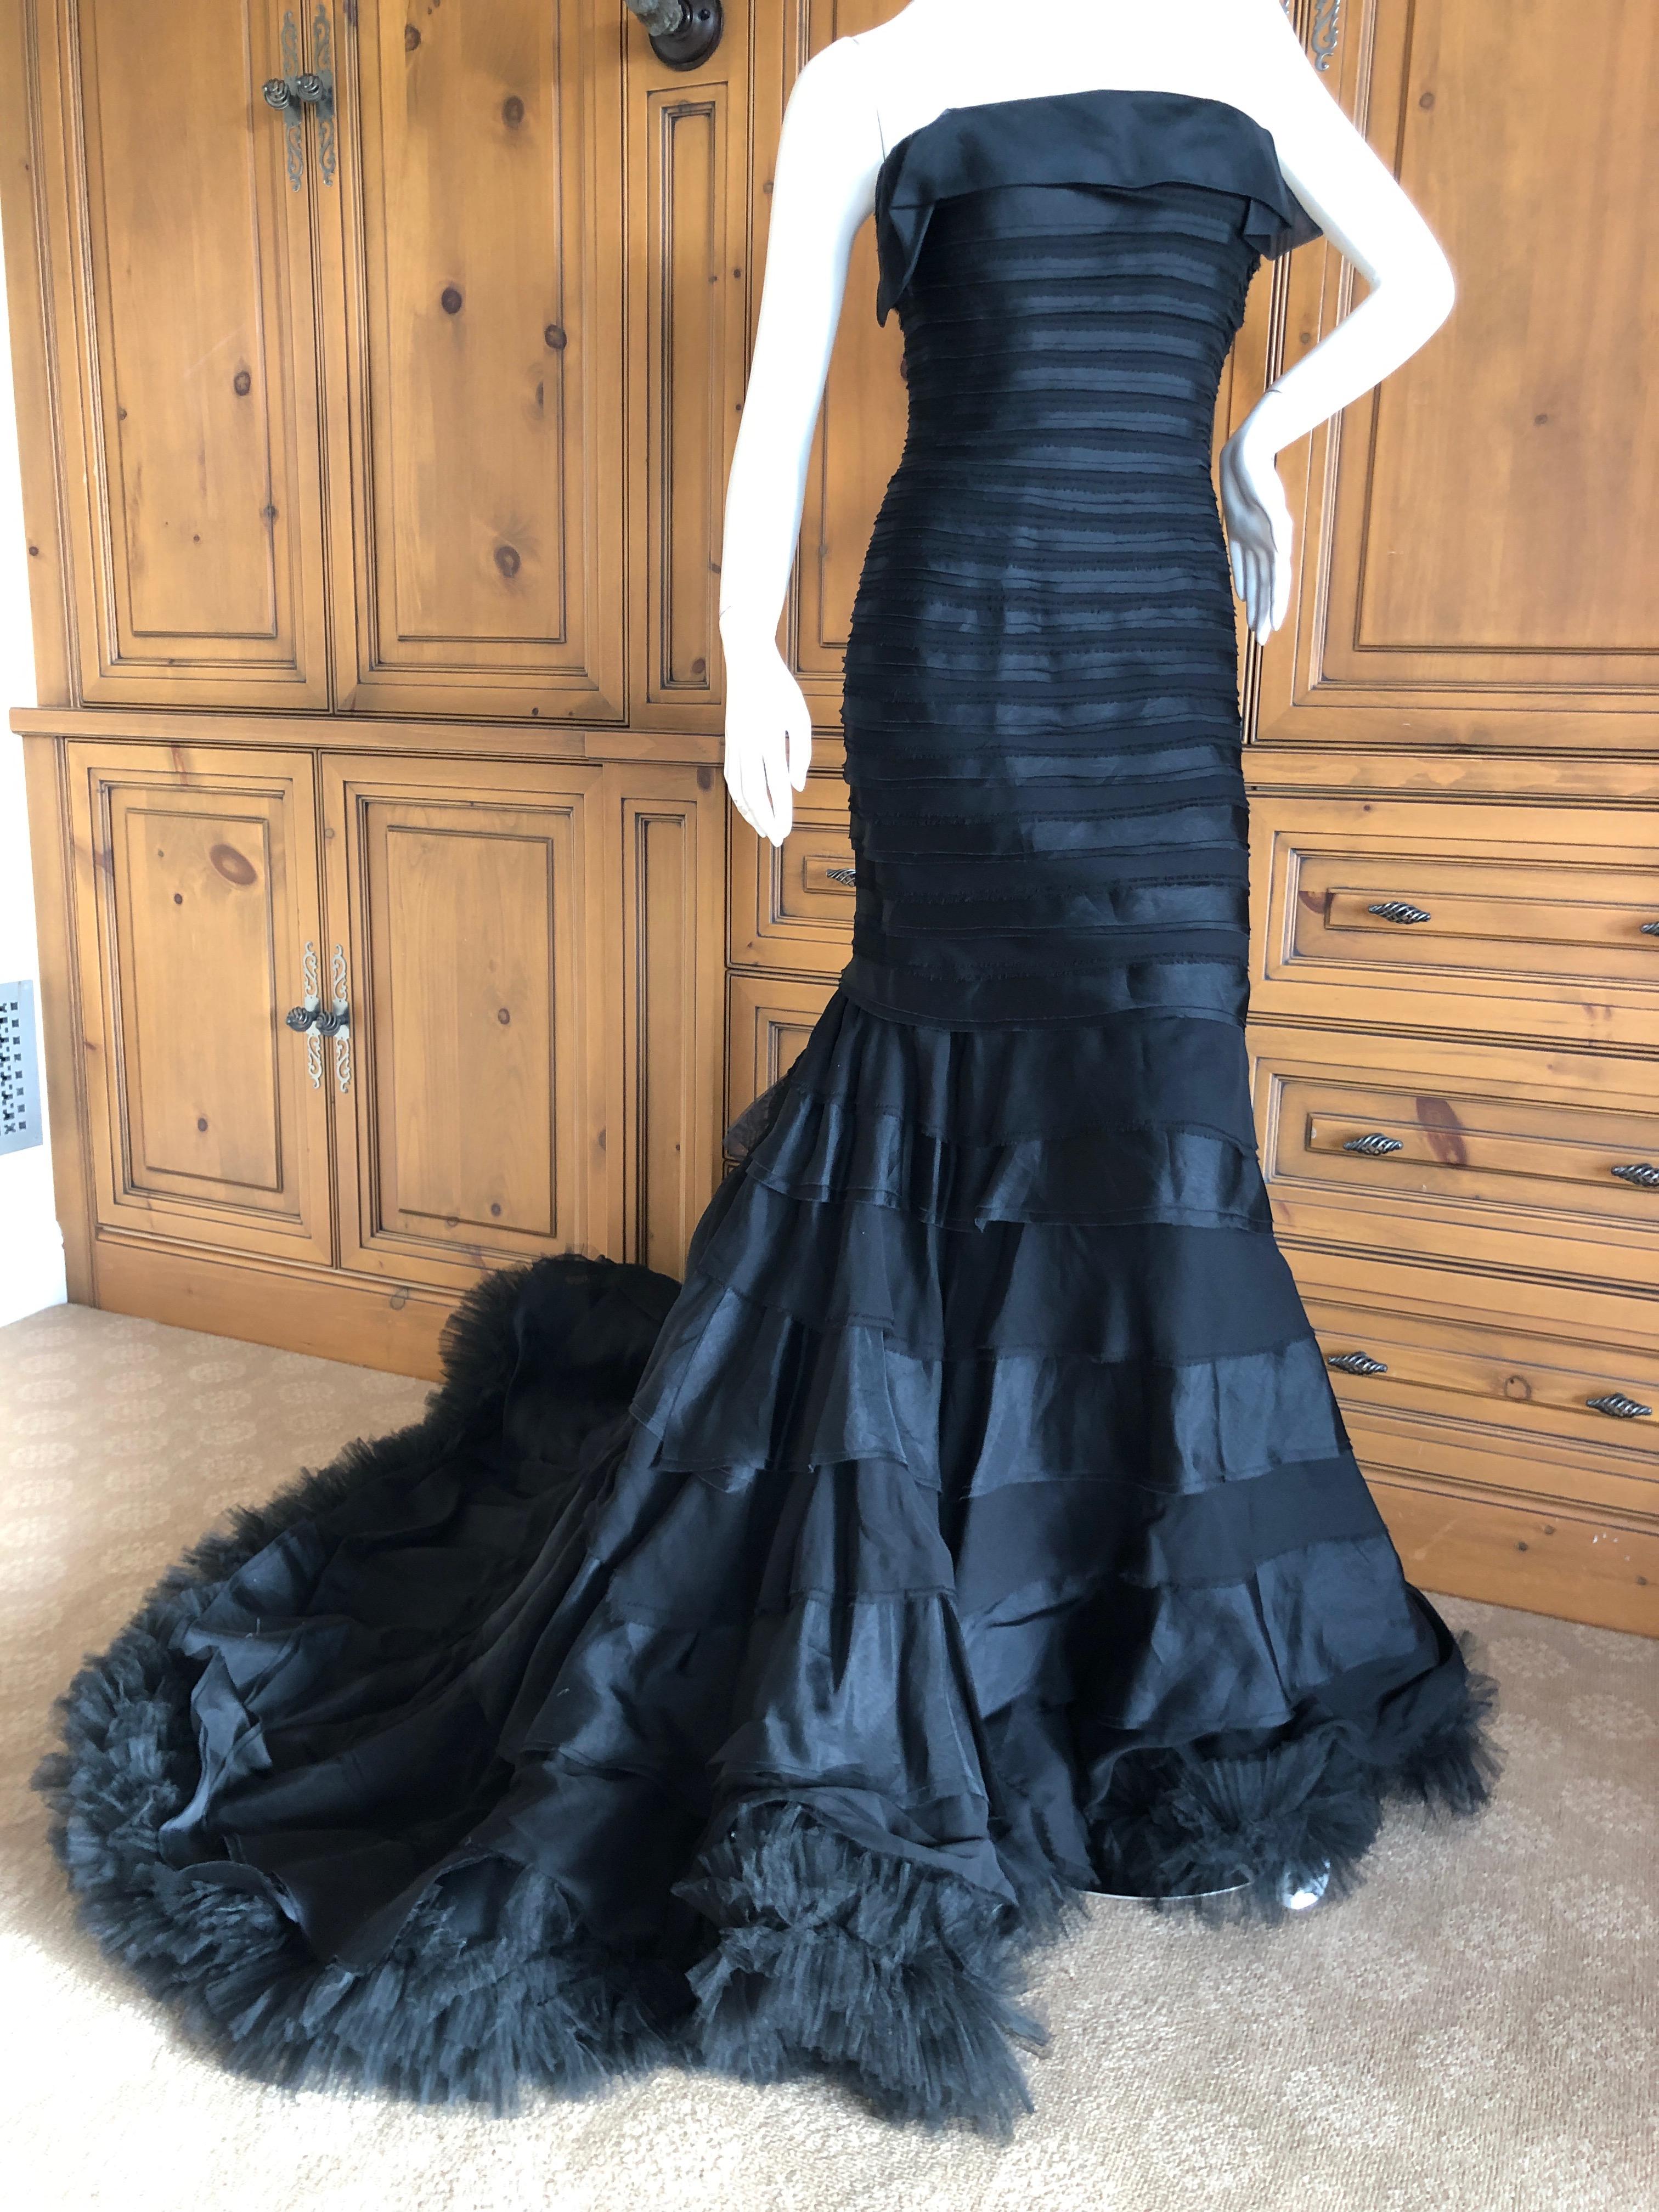 Oscar de la Renta Black Flamenco Ruffled Ballgown with Grand Train
There is an inner bustier.
Simply Stunning. Please use the zoom feature to see al the remarkable details.
Size 8
 Bust 34